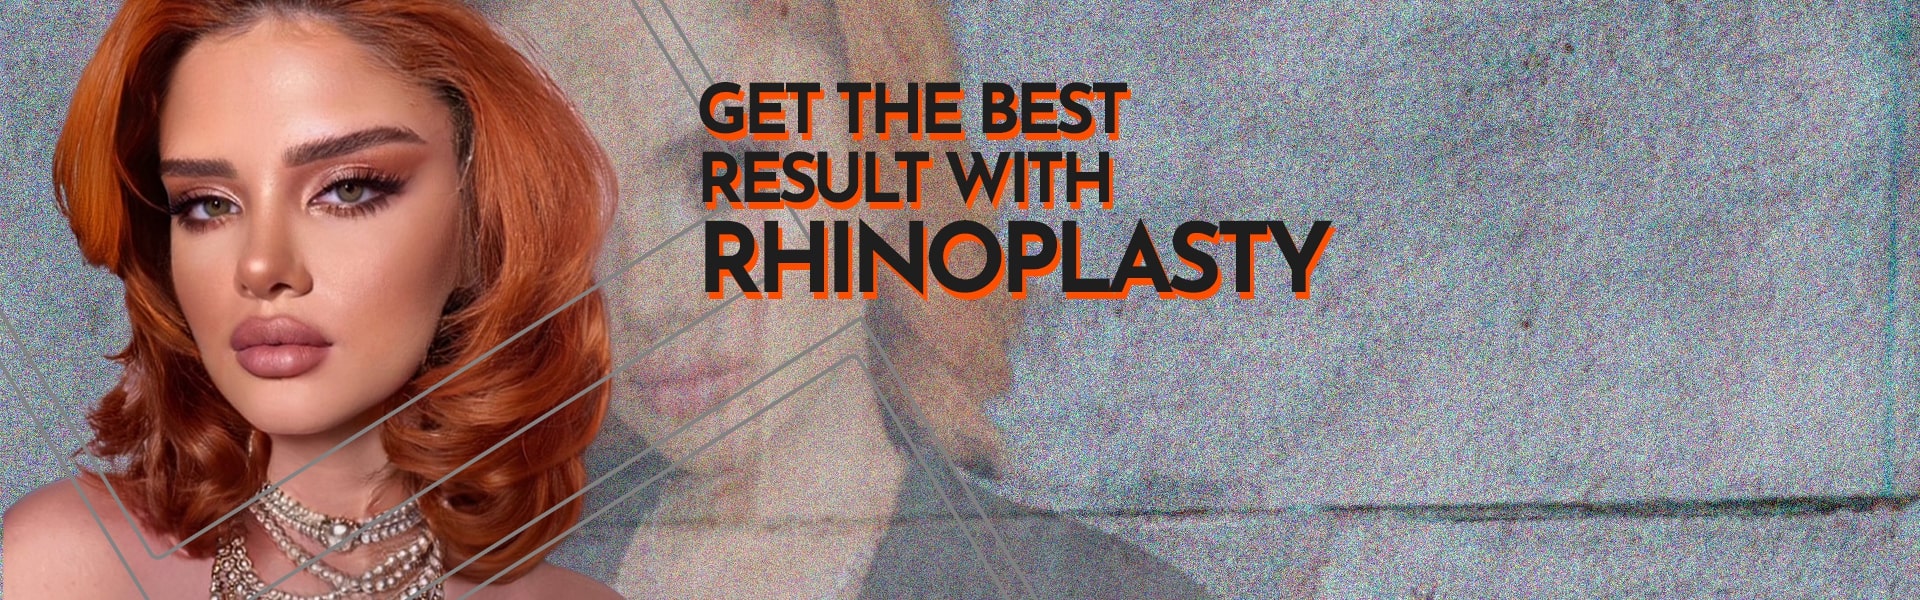 Get The Best Result with Rhinoplasty 